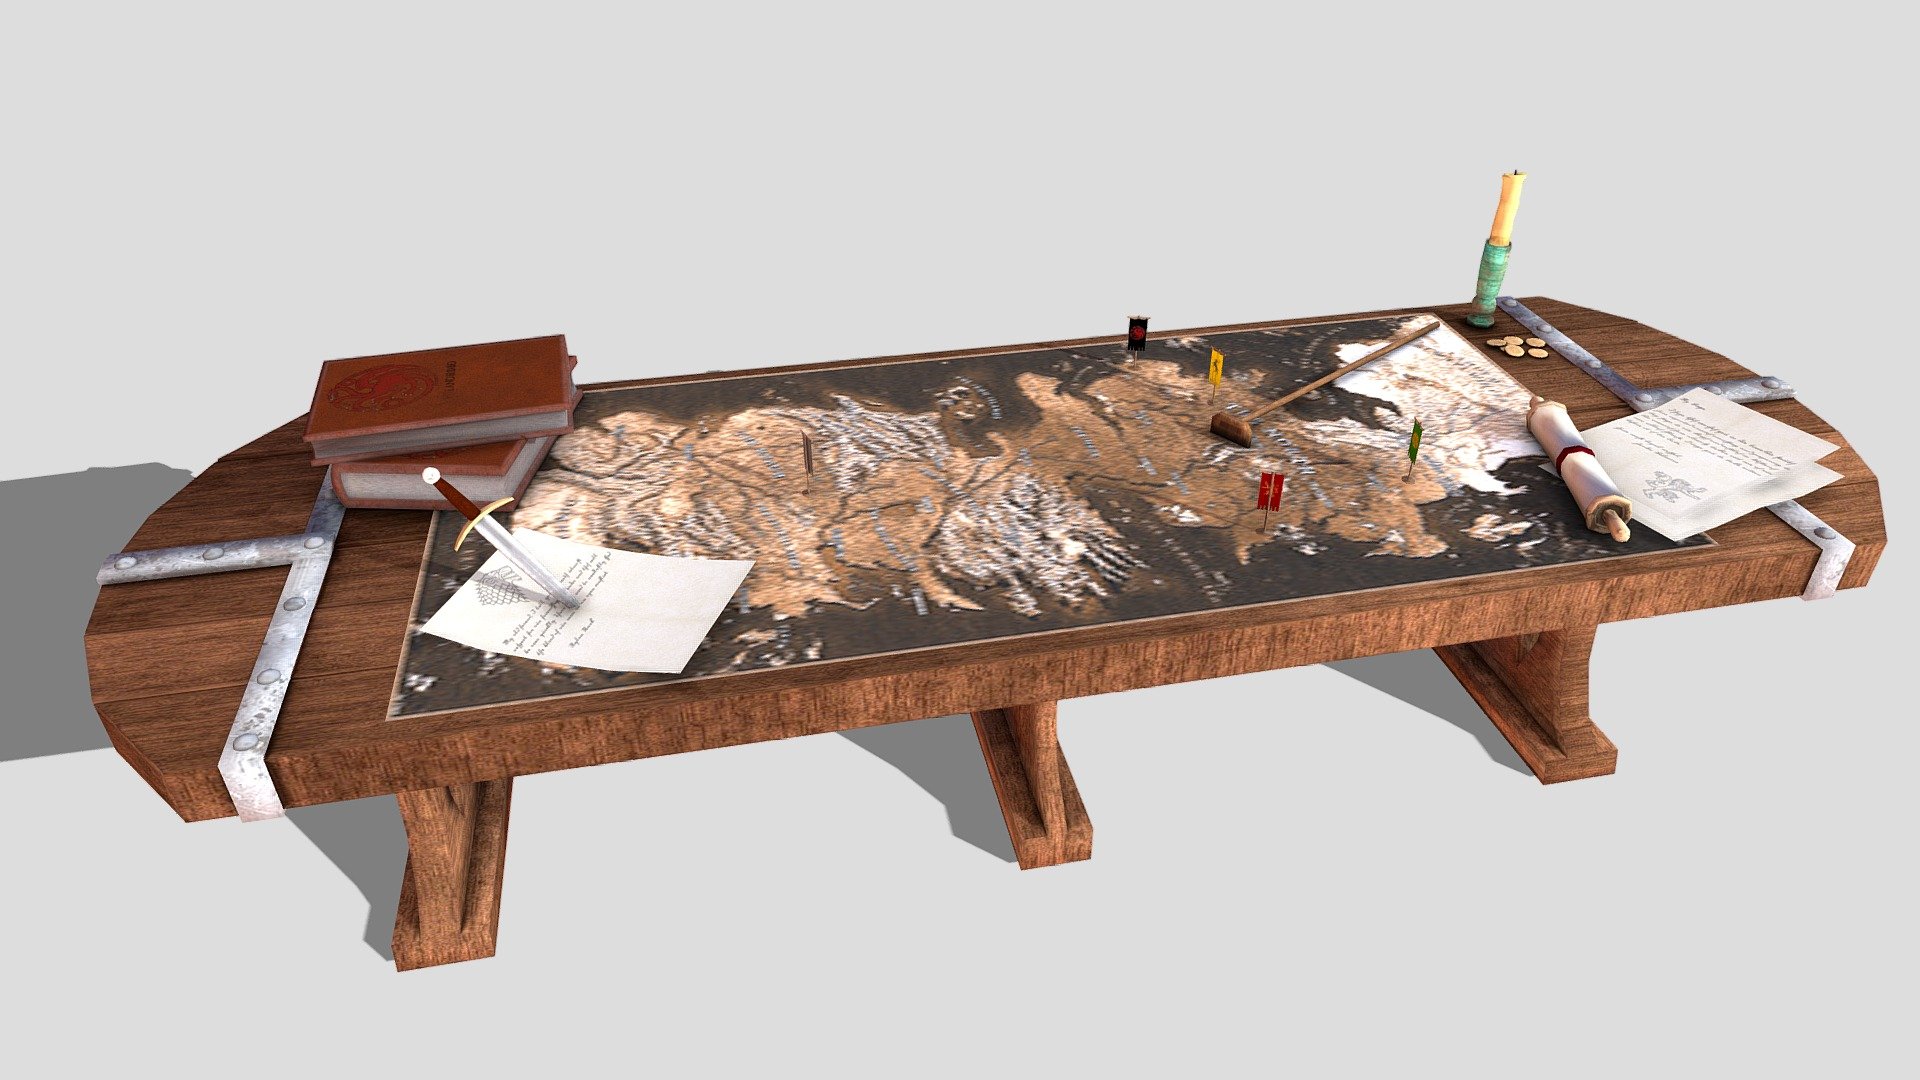 A commission made for Second Life and my first entry as a partner of this second life store. This low poly table has been inspired by the TV series Game of Thrones and serves as a prop in GoT inspired roleplay environments or as simple decorations in the world of Second Life.


An access link to the product can be found here:


https://marketplace.secondlife.com/p/Mw-War-Table-GOT/19454926



!Notice!


Unfortunately my affiliation with that store has since ceased and this product will receive no more updates 3d model